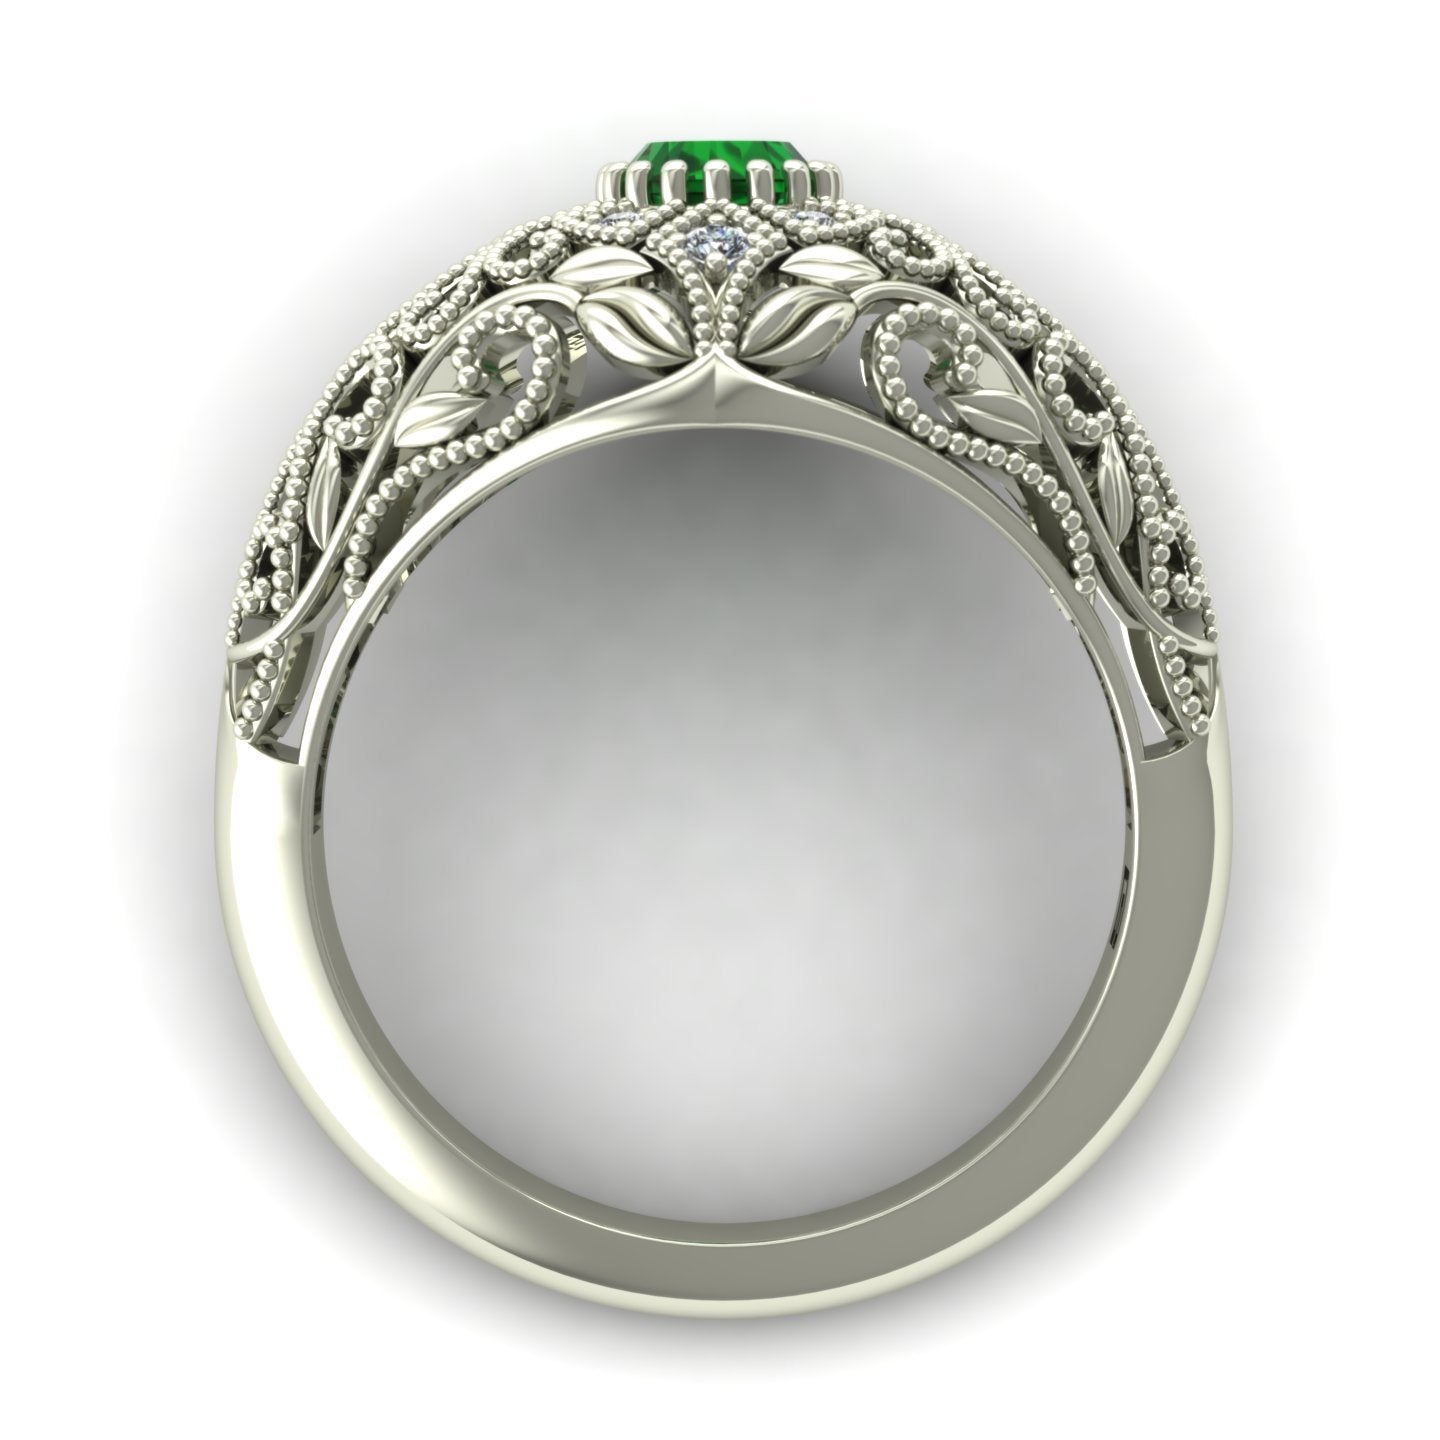 Emerald and diamond dome ring with leaves and vines in 14k white gold - Charles Babb Designs - through finger view